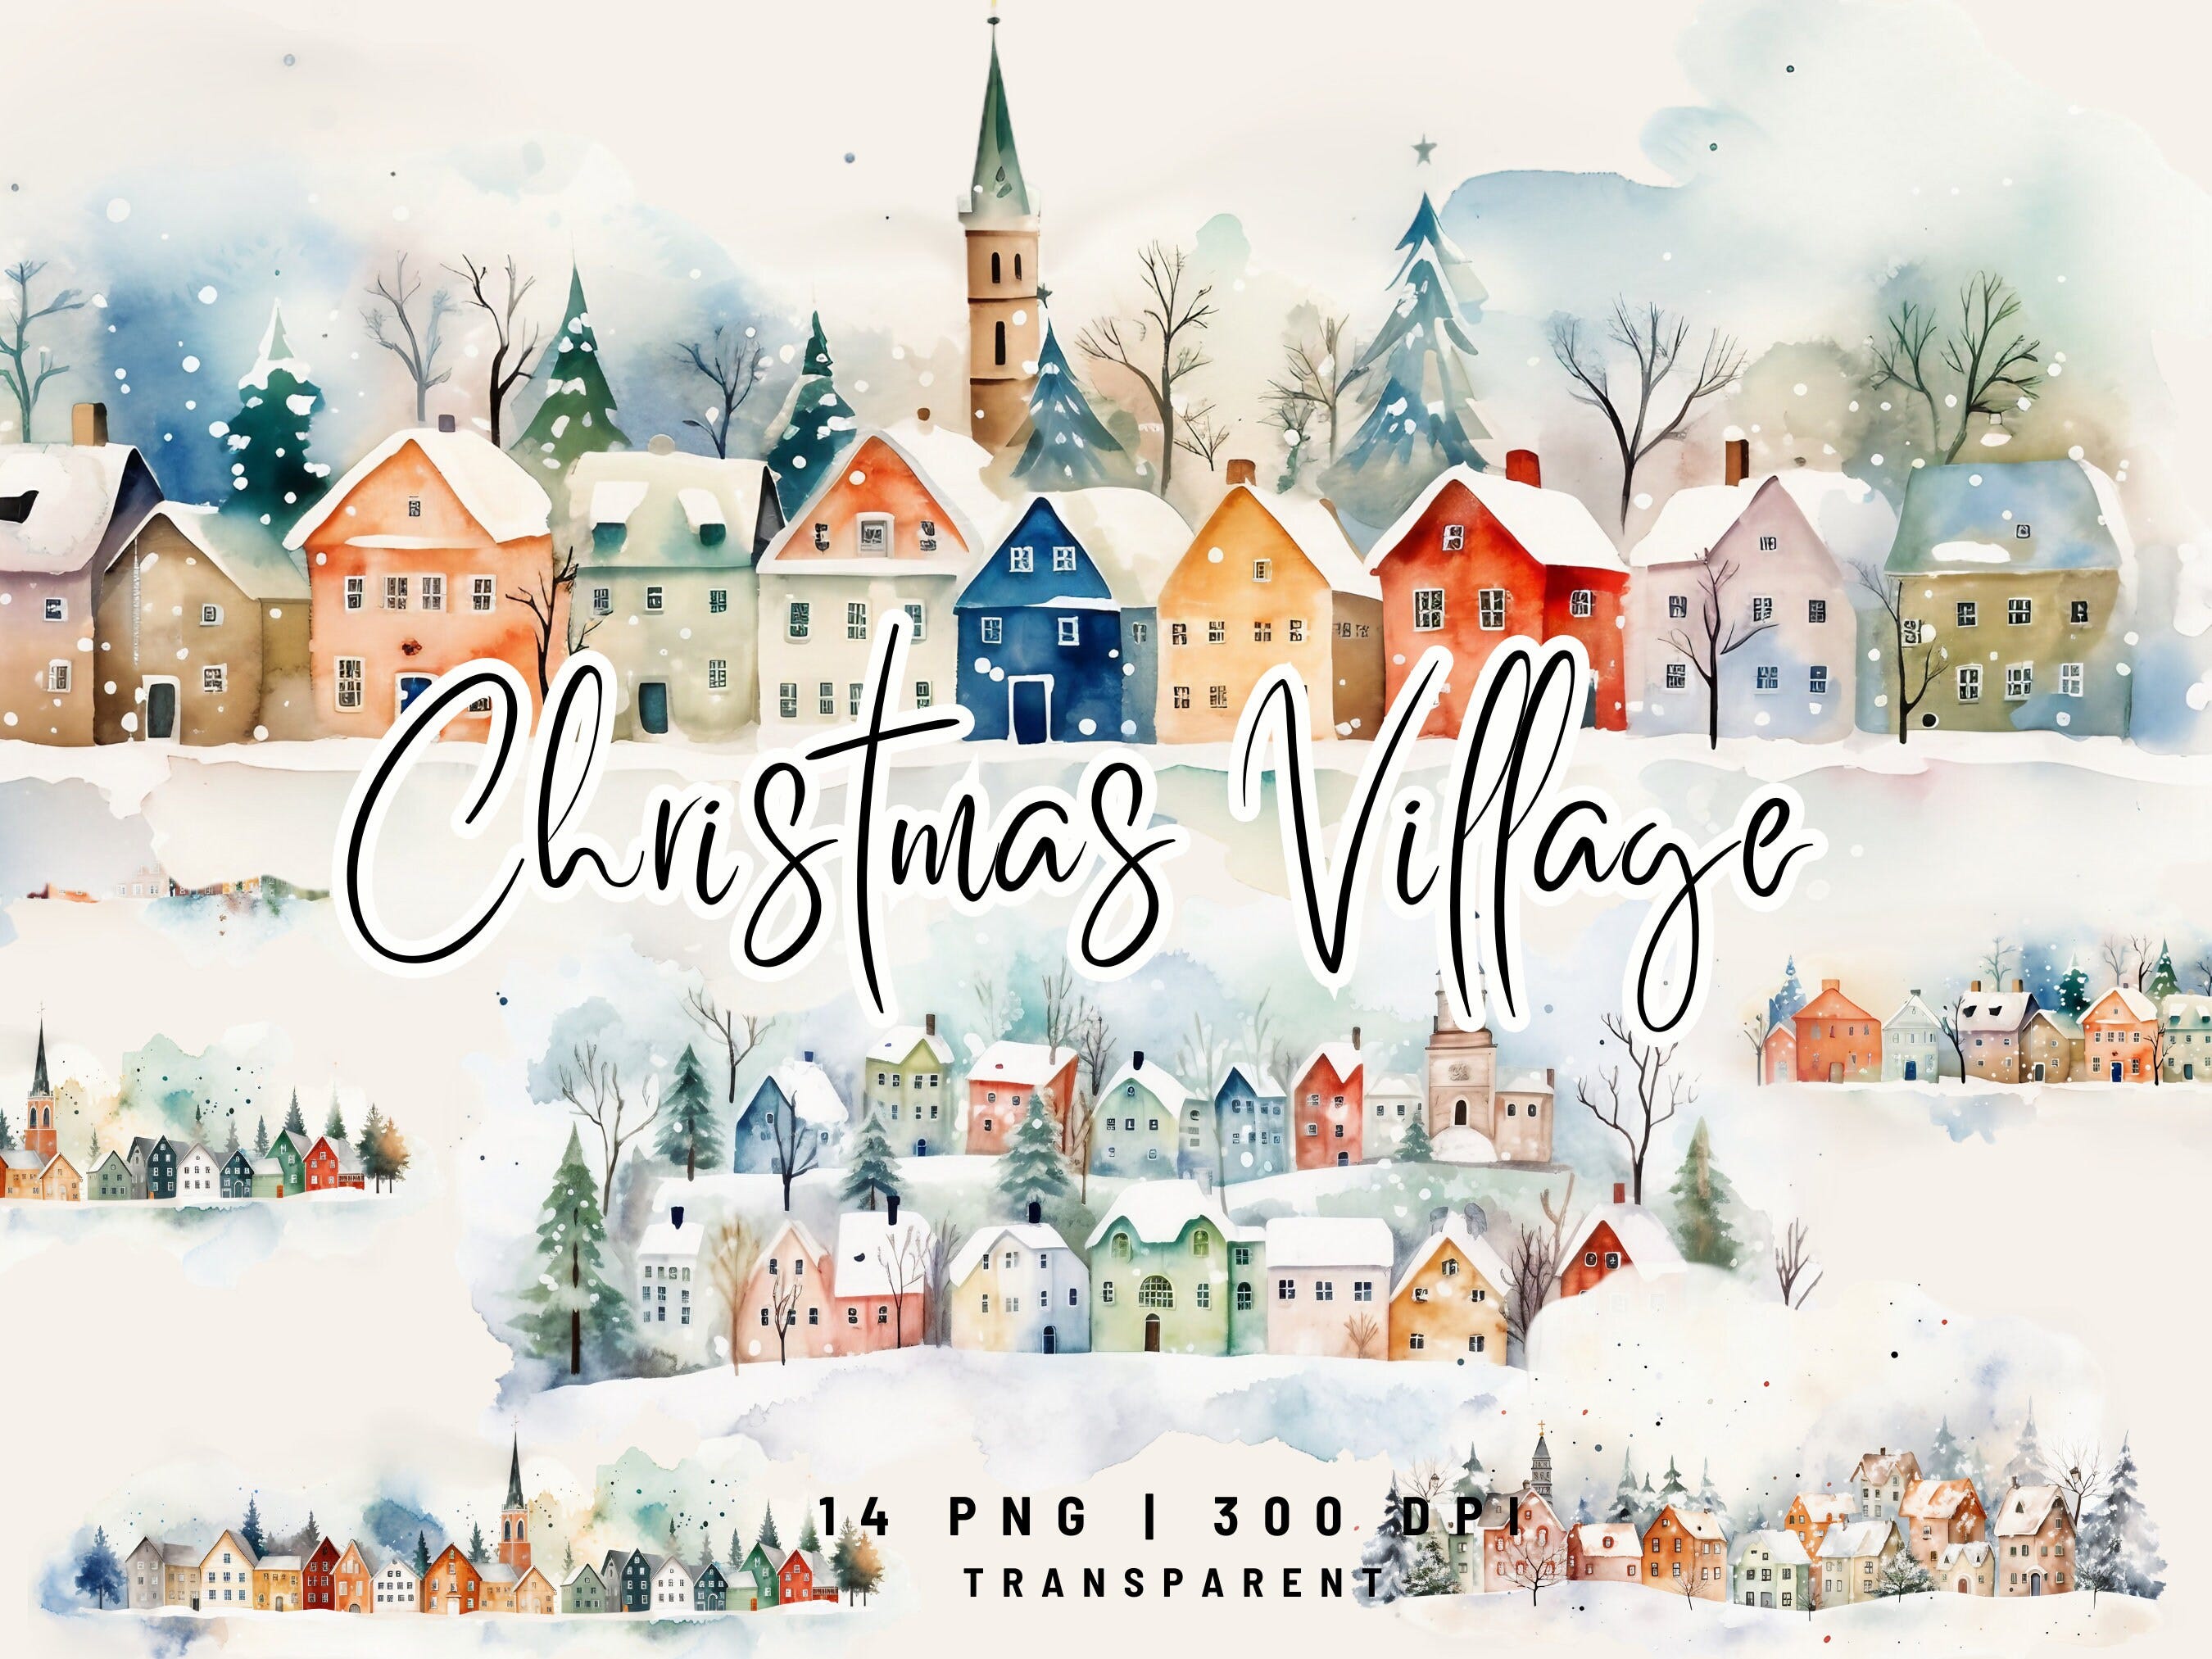 14 PNG Winter Watercolor Scene Clipart, Winter Village clipart, Christmas clipart, Watercolor clipart, Holiday clipart, Winter sublimation